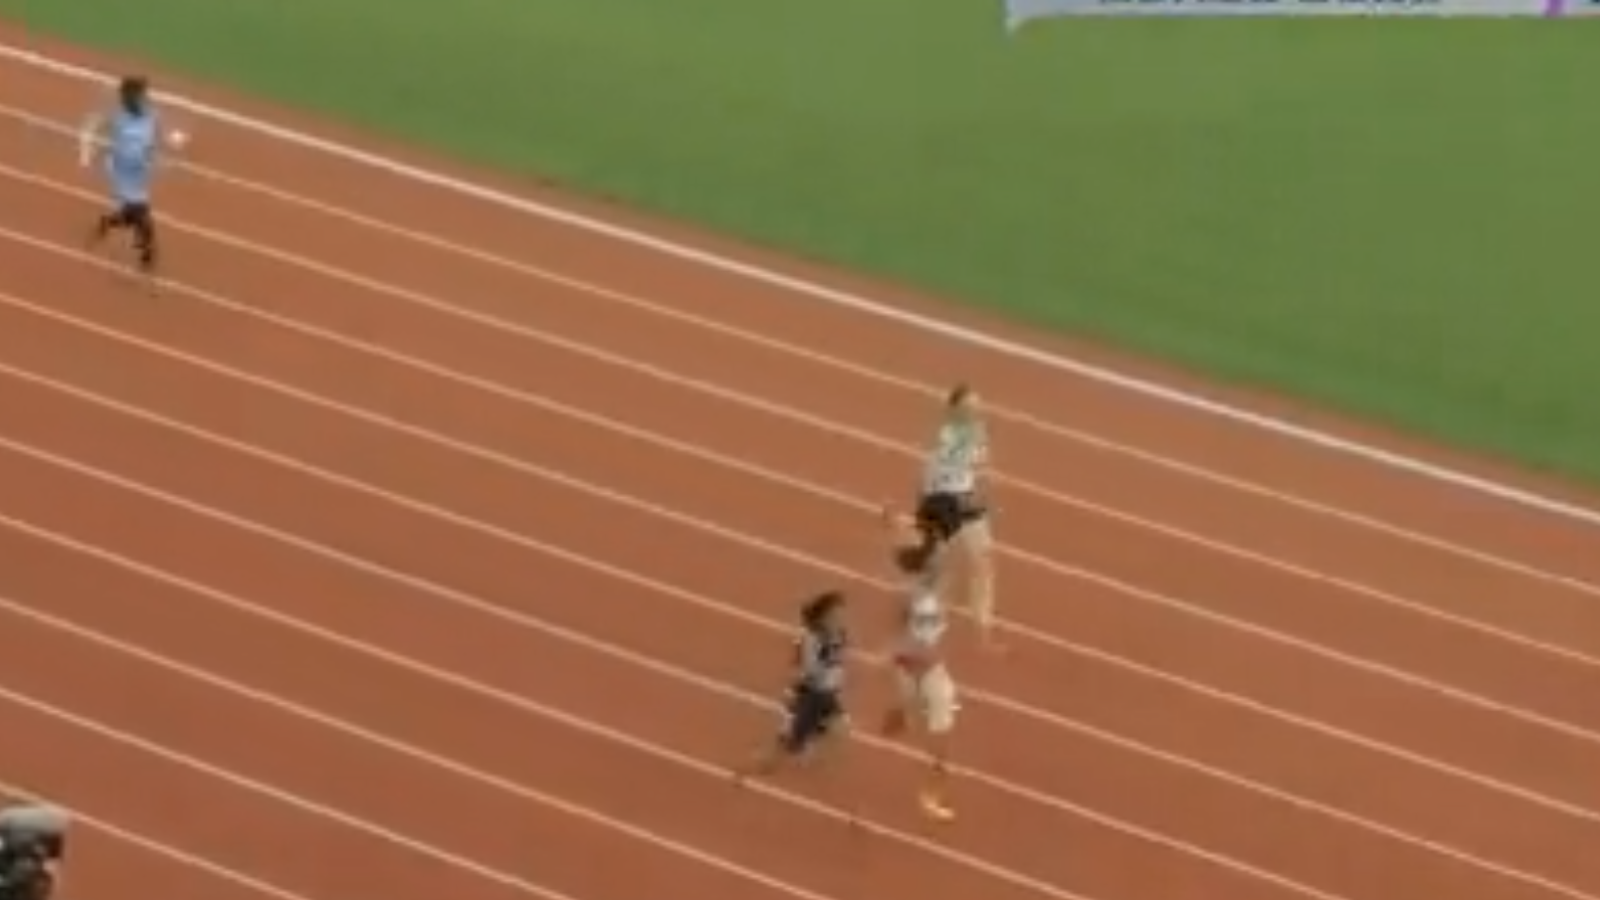 Somali sports official suspended after 'untrained runner' competes in games